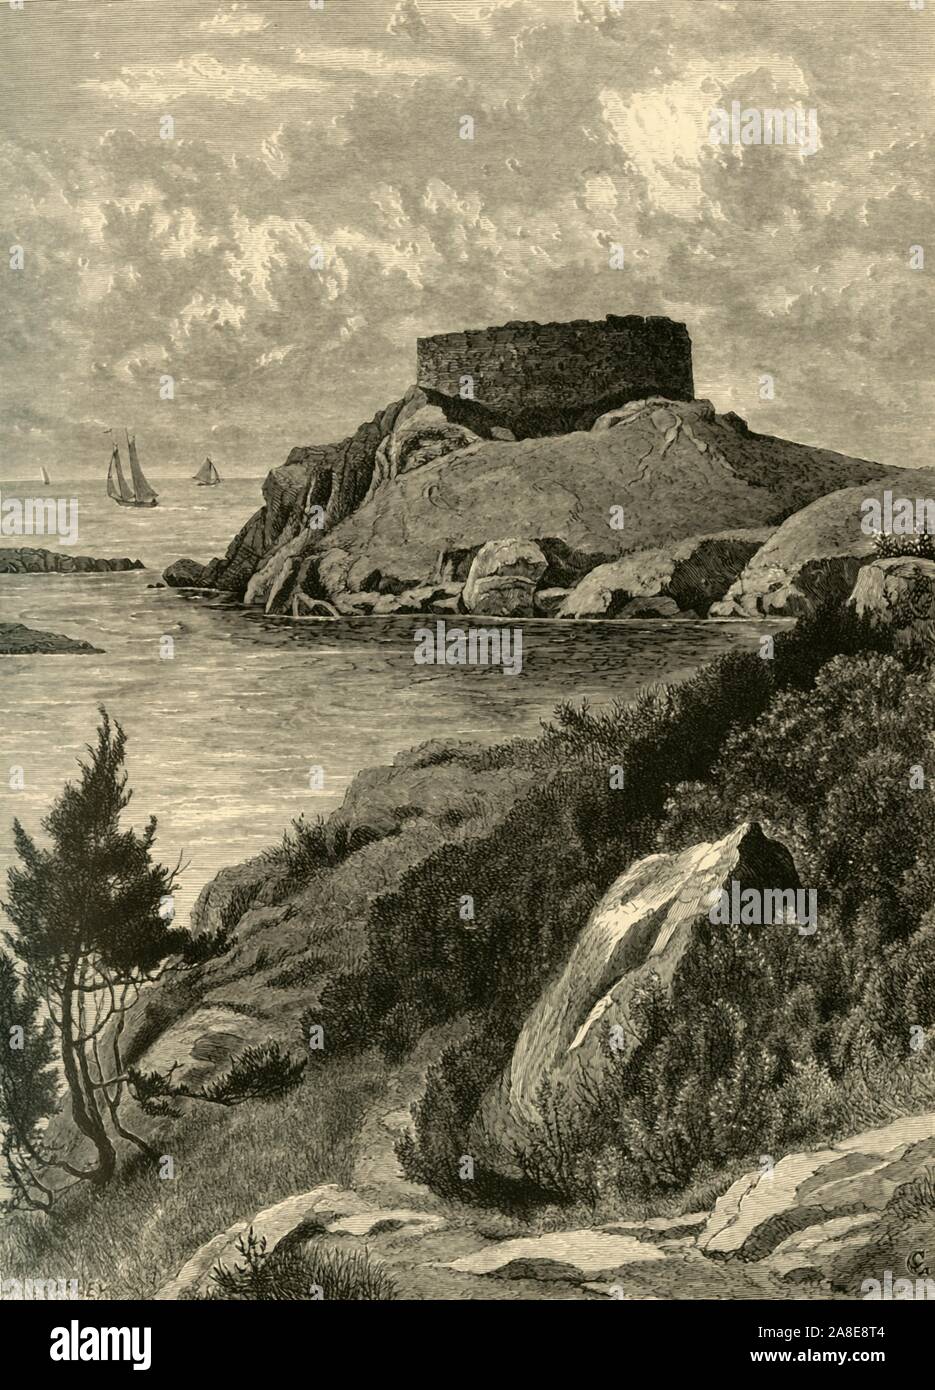 'Old Fort Dumpling', 1872. View of the fort, officially called Fort Louis and, later, Fort Brown, overlooking the entrance to Narragansett Bay, Jamestown, Rhode Island, USA. Construction began in 1798. From &quot;Picturesque America; or, The Land We Live In, A Delineation by Pen and Pencil of the Mountains, Rivers, Lakes...with Illustrations on Steel and Wood by Eminent American Artists&quot; Vol. I, edited by William Cullen Bryant. [D. Appleton and Company, New York, 1872] Stock Photo